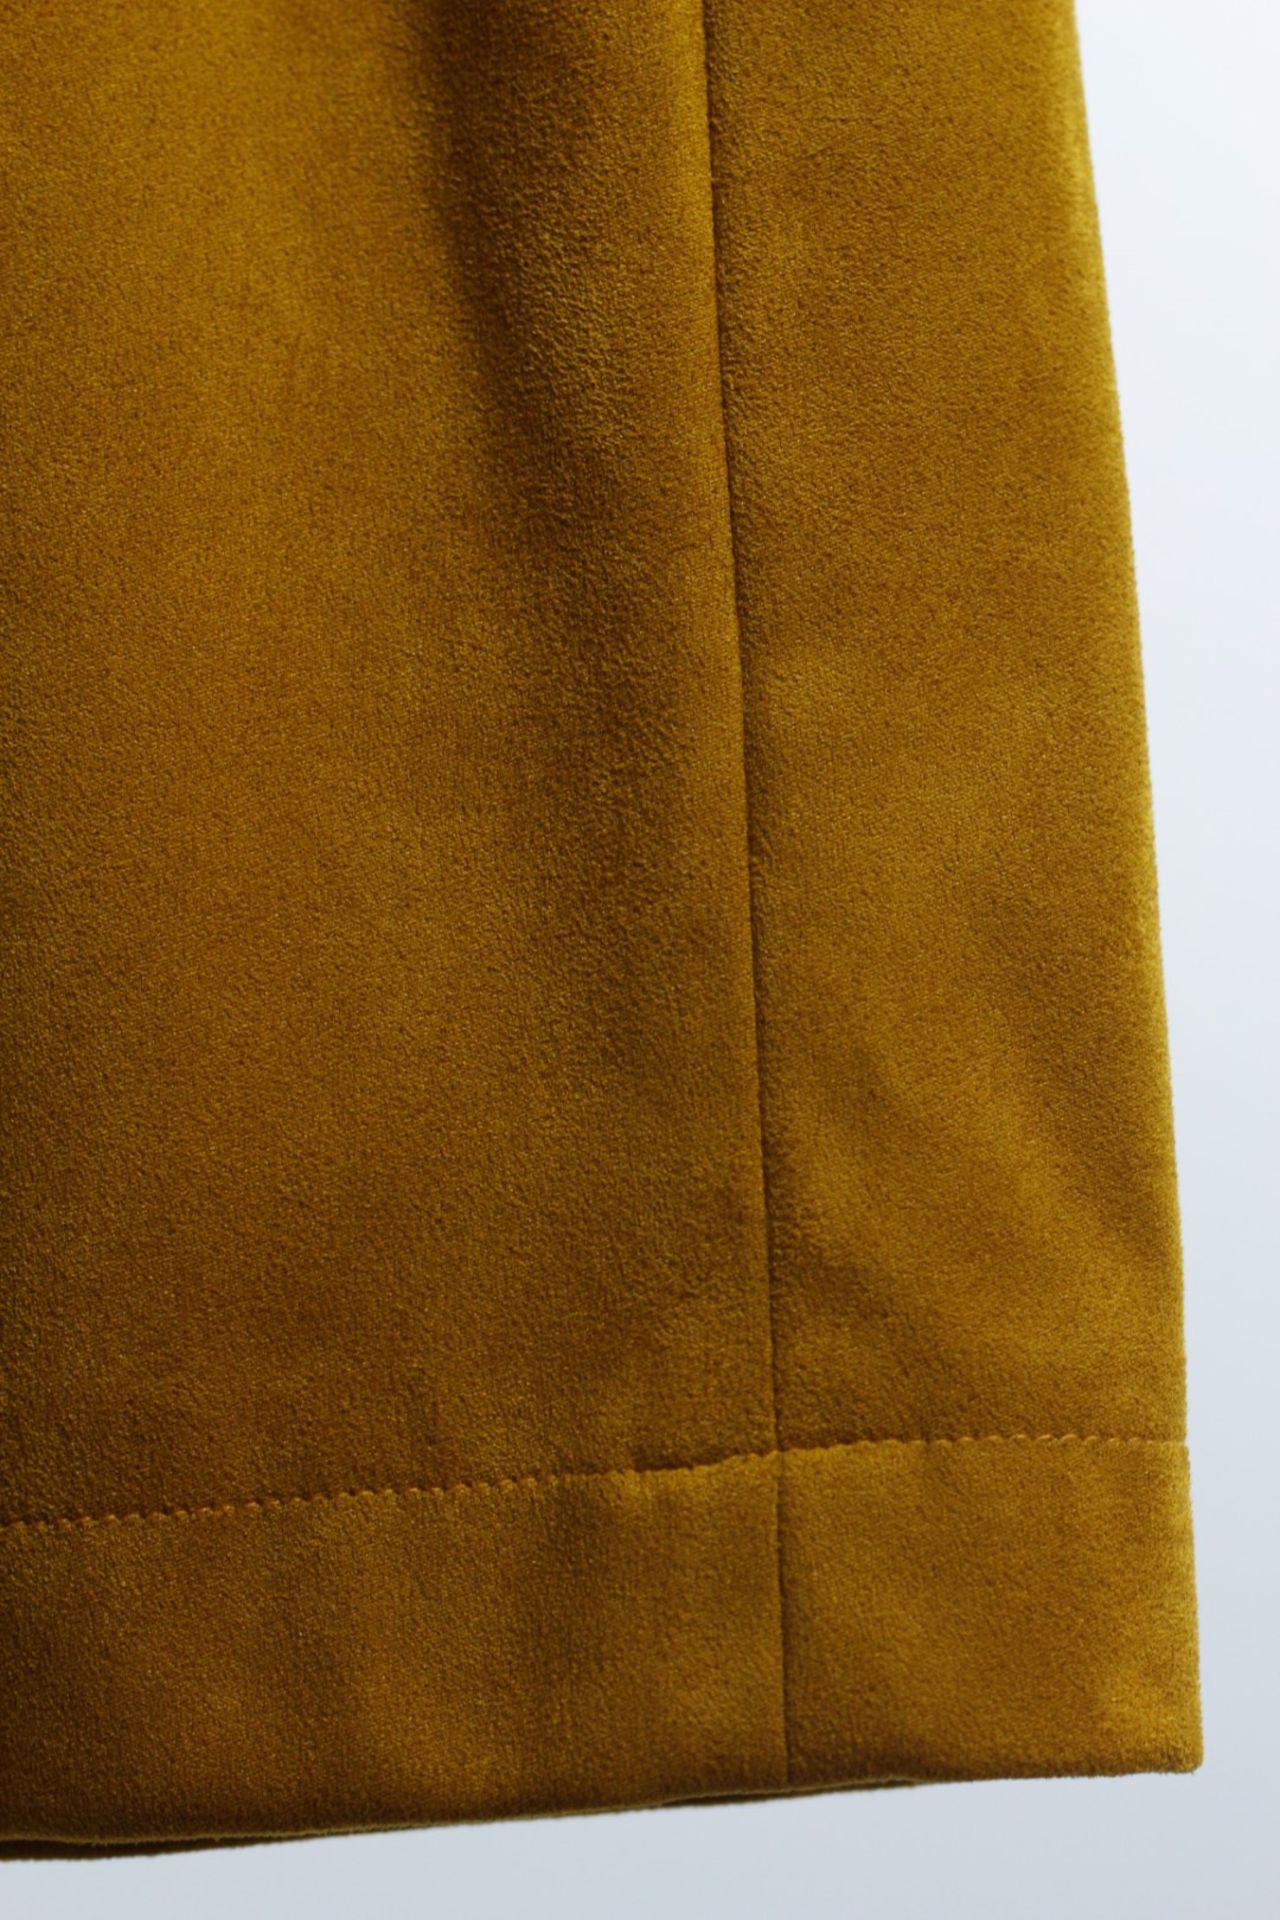 1 x Boutique Le Duc Ochre Skirt - From a High End Clothing Boutique In The Netherlands - - Image 3 of 3